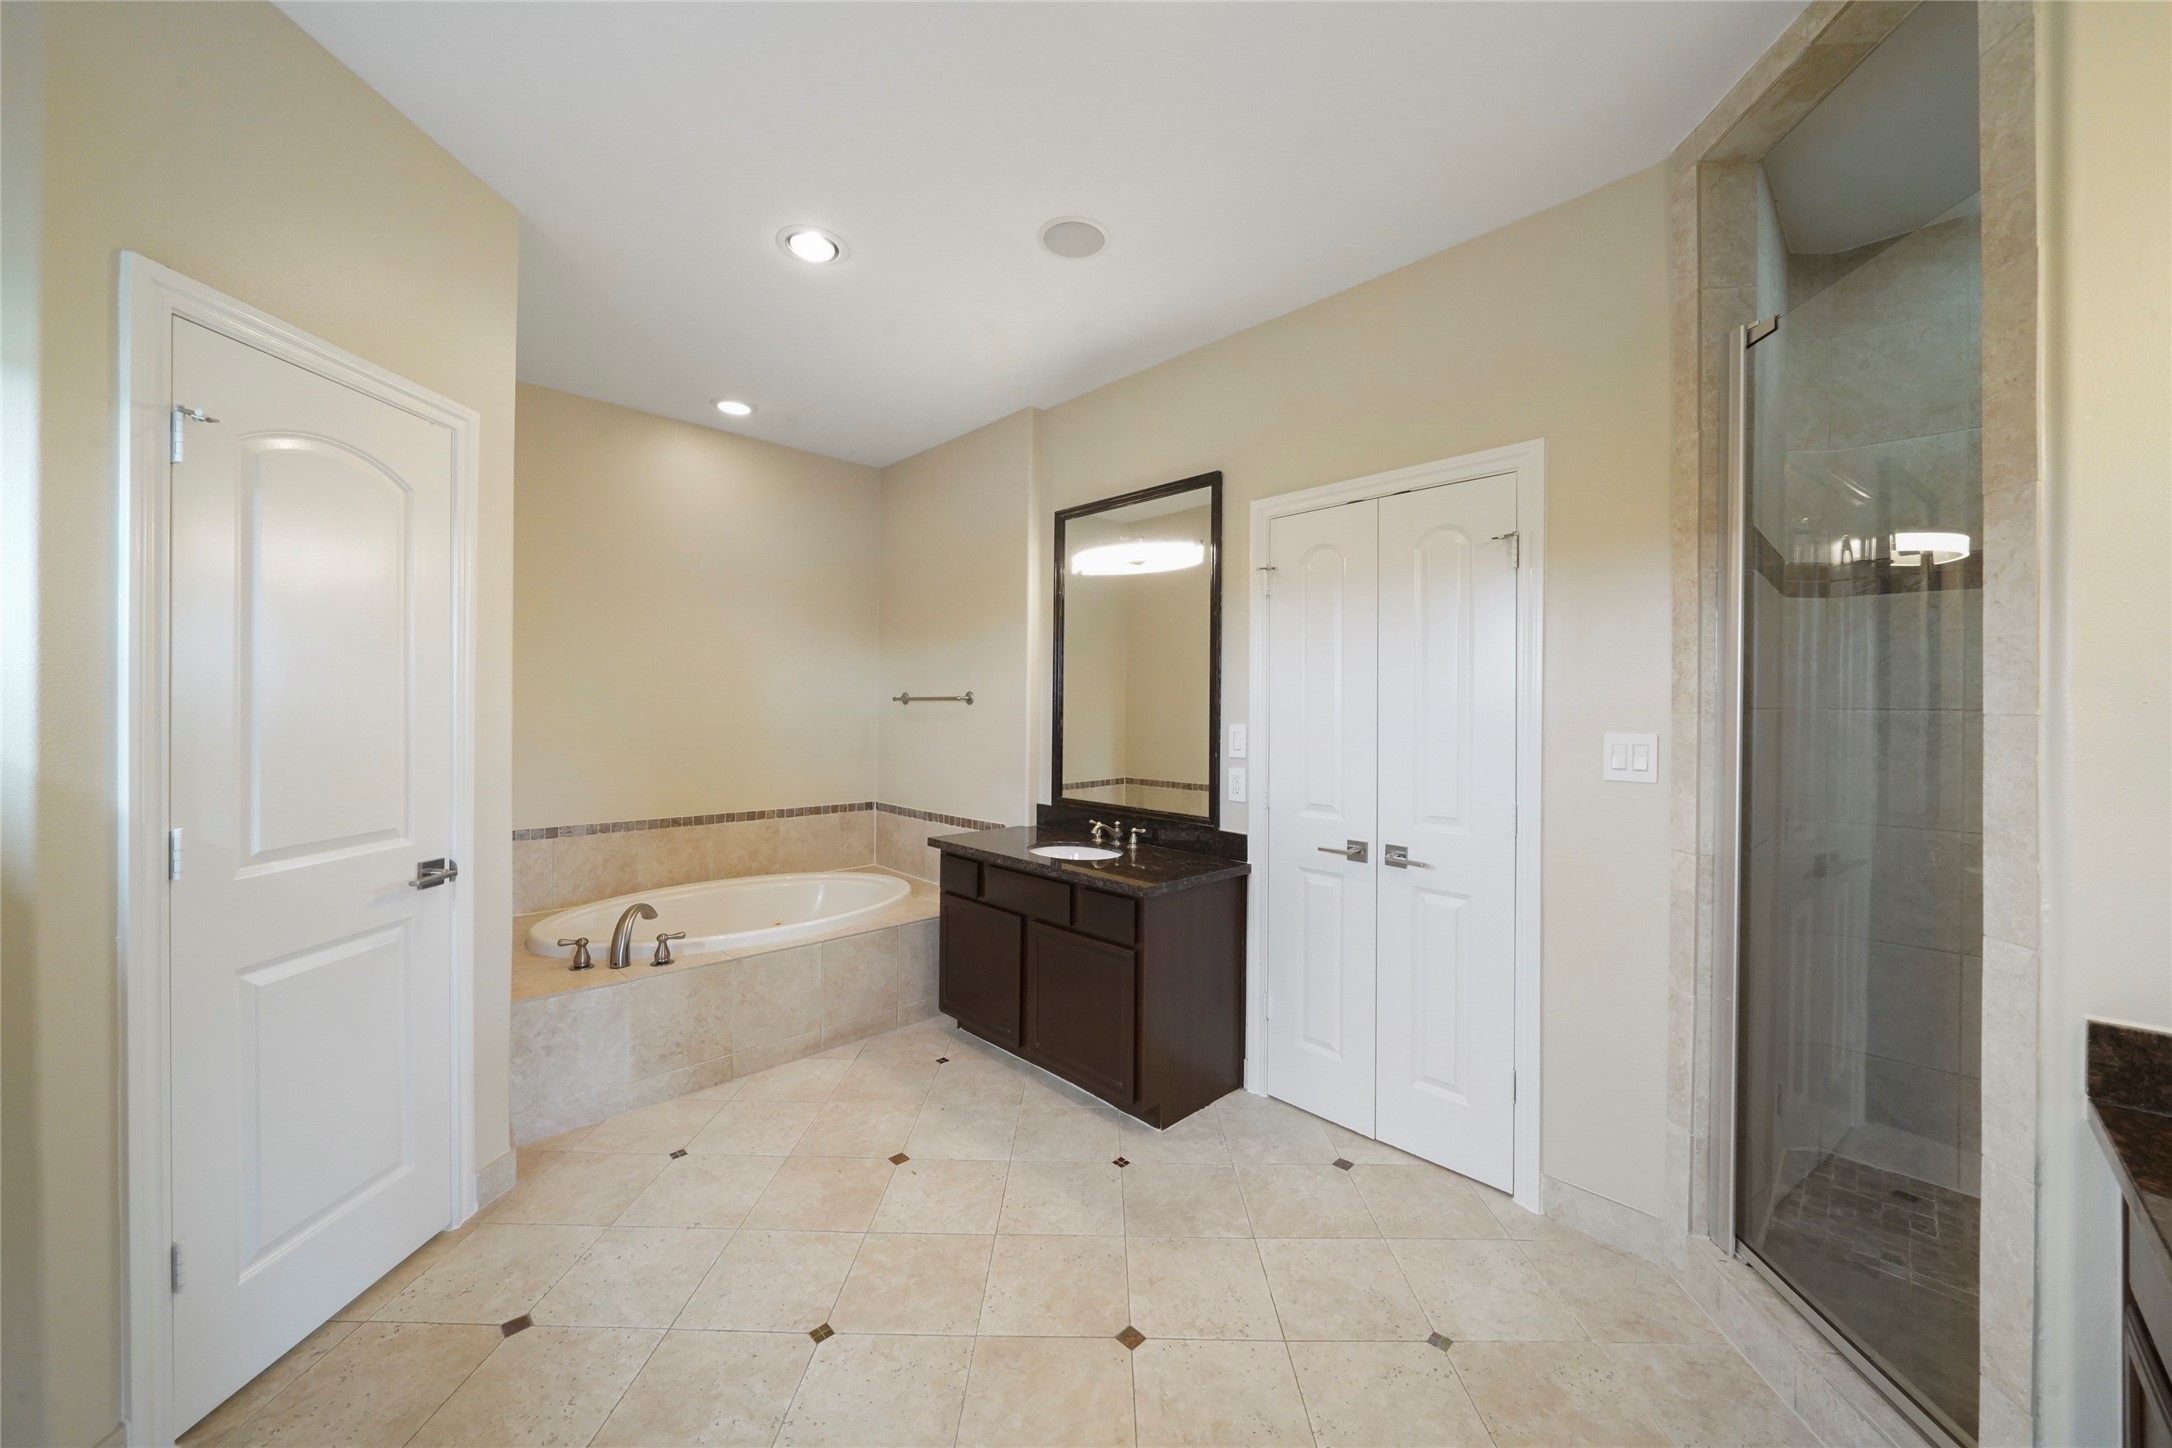 The primary bathroom with separate water closet for privacy.